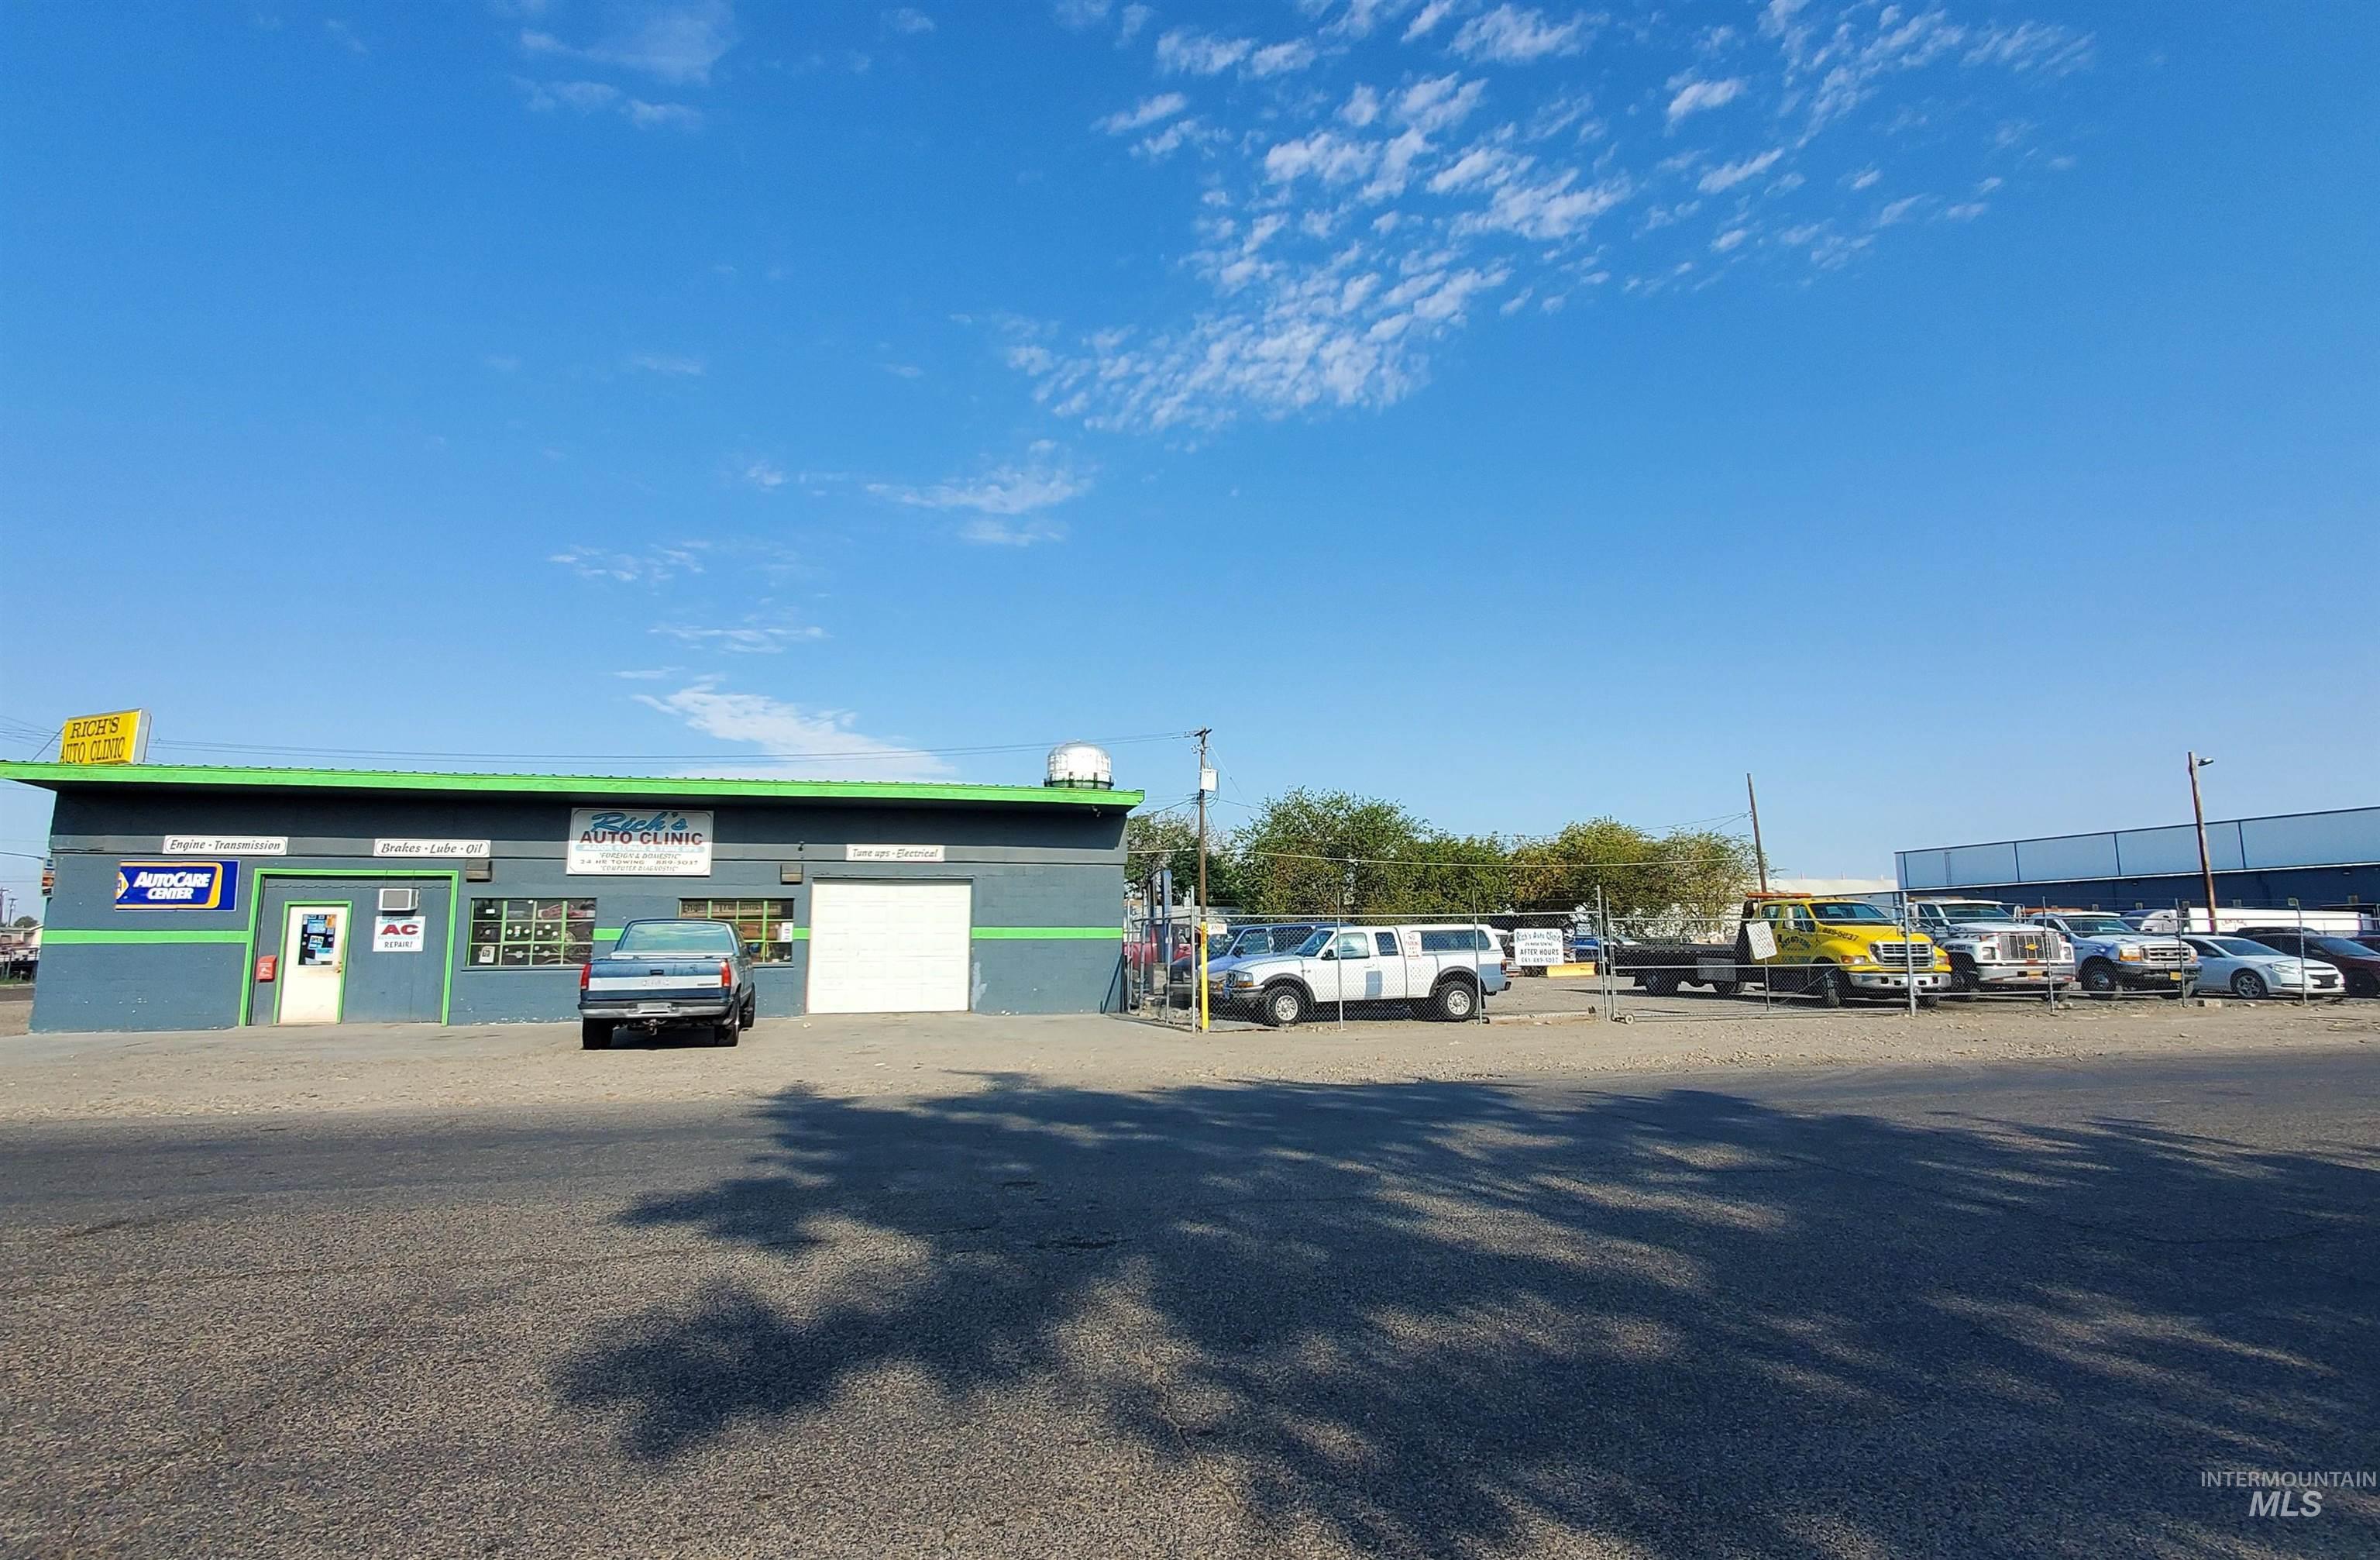 211 NE 2nd St, Ontario, Oregon 97914, Business/Commercial For Sale, Price $325,000,MLS 98855059